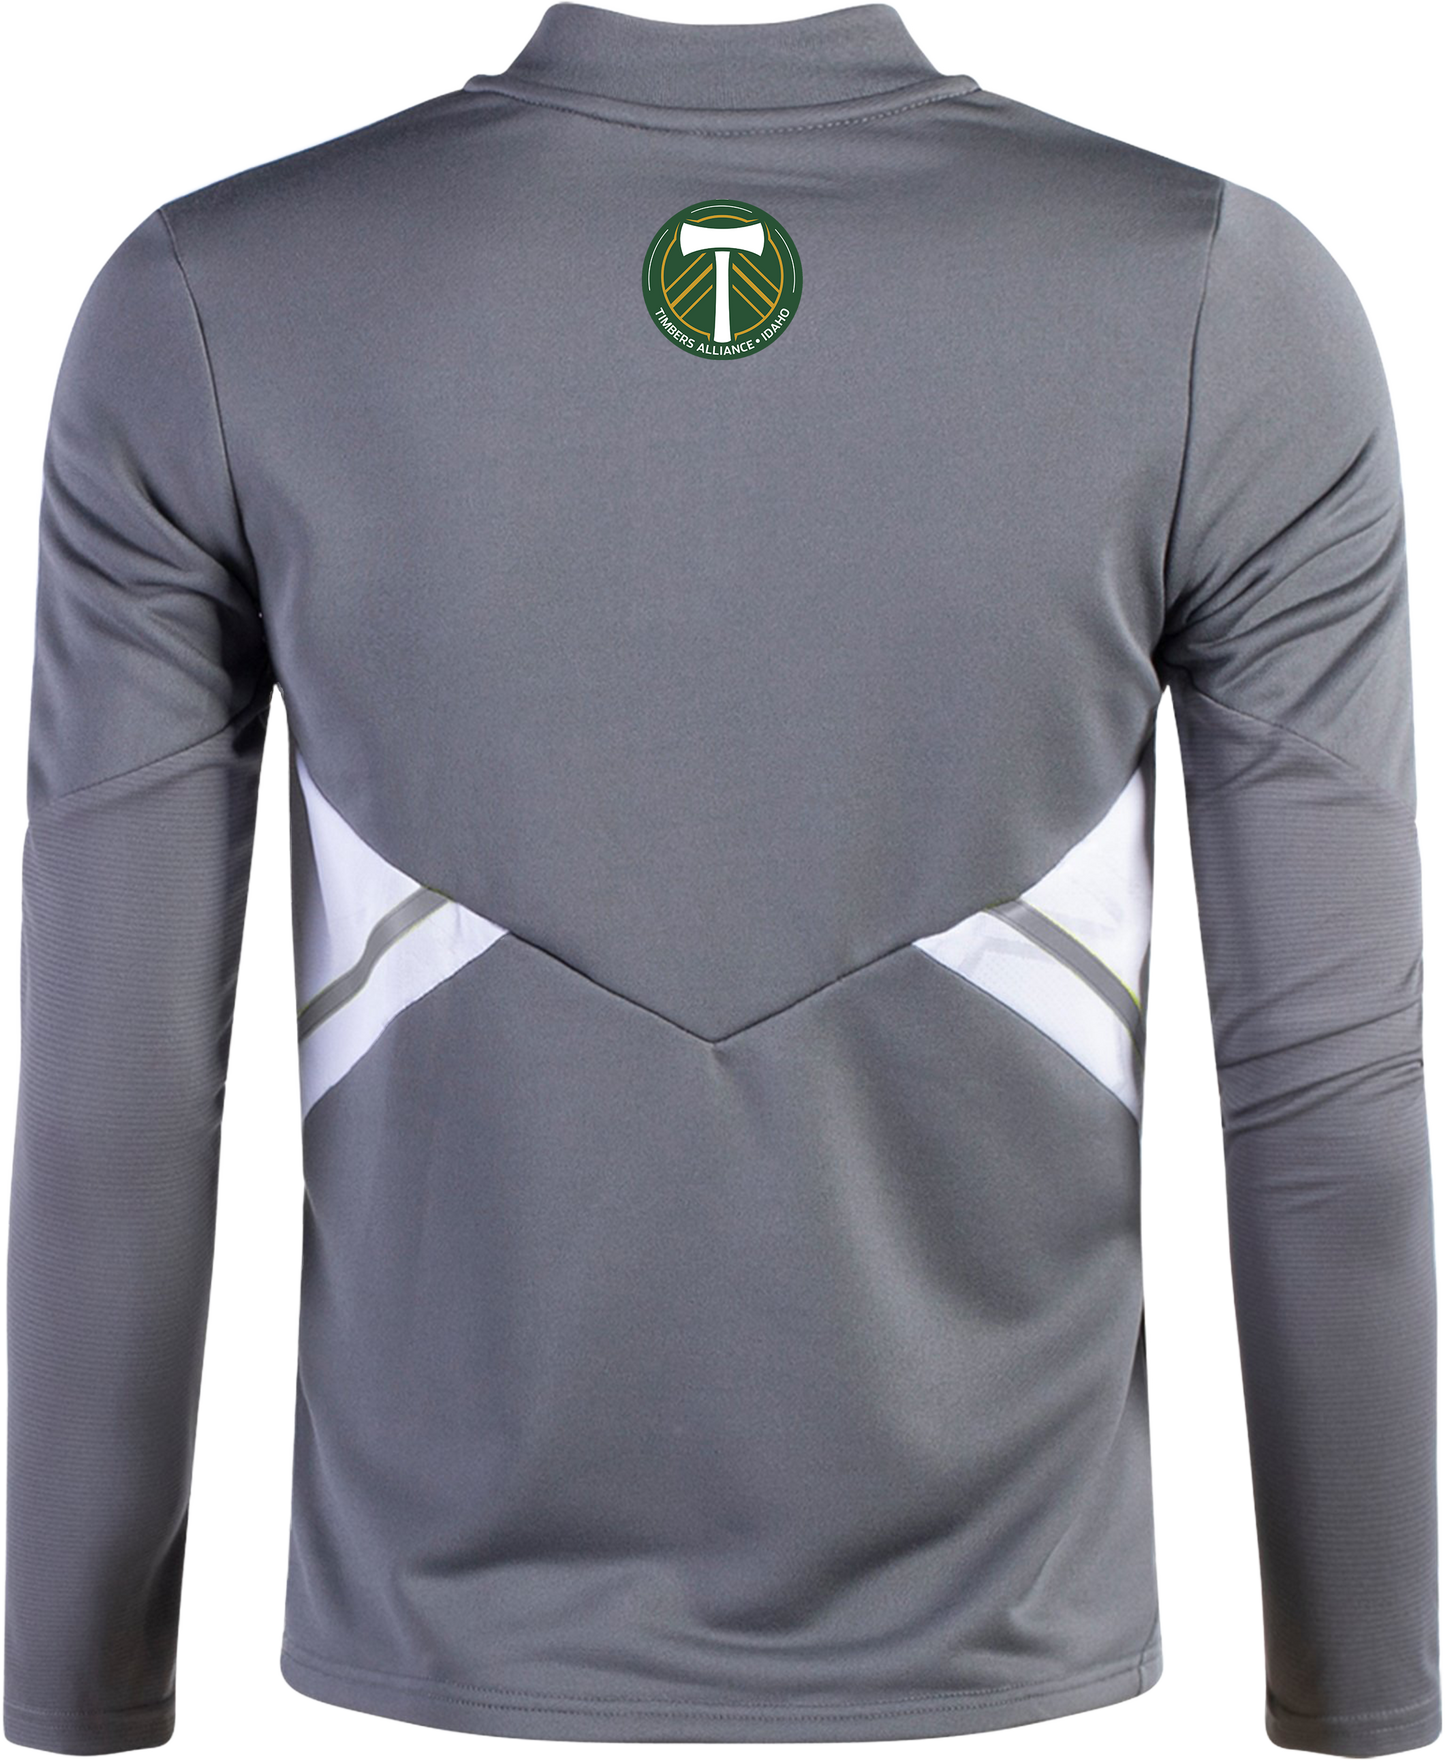 North FC Timbers '22 Warm-Up Top [Men's]